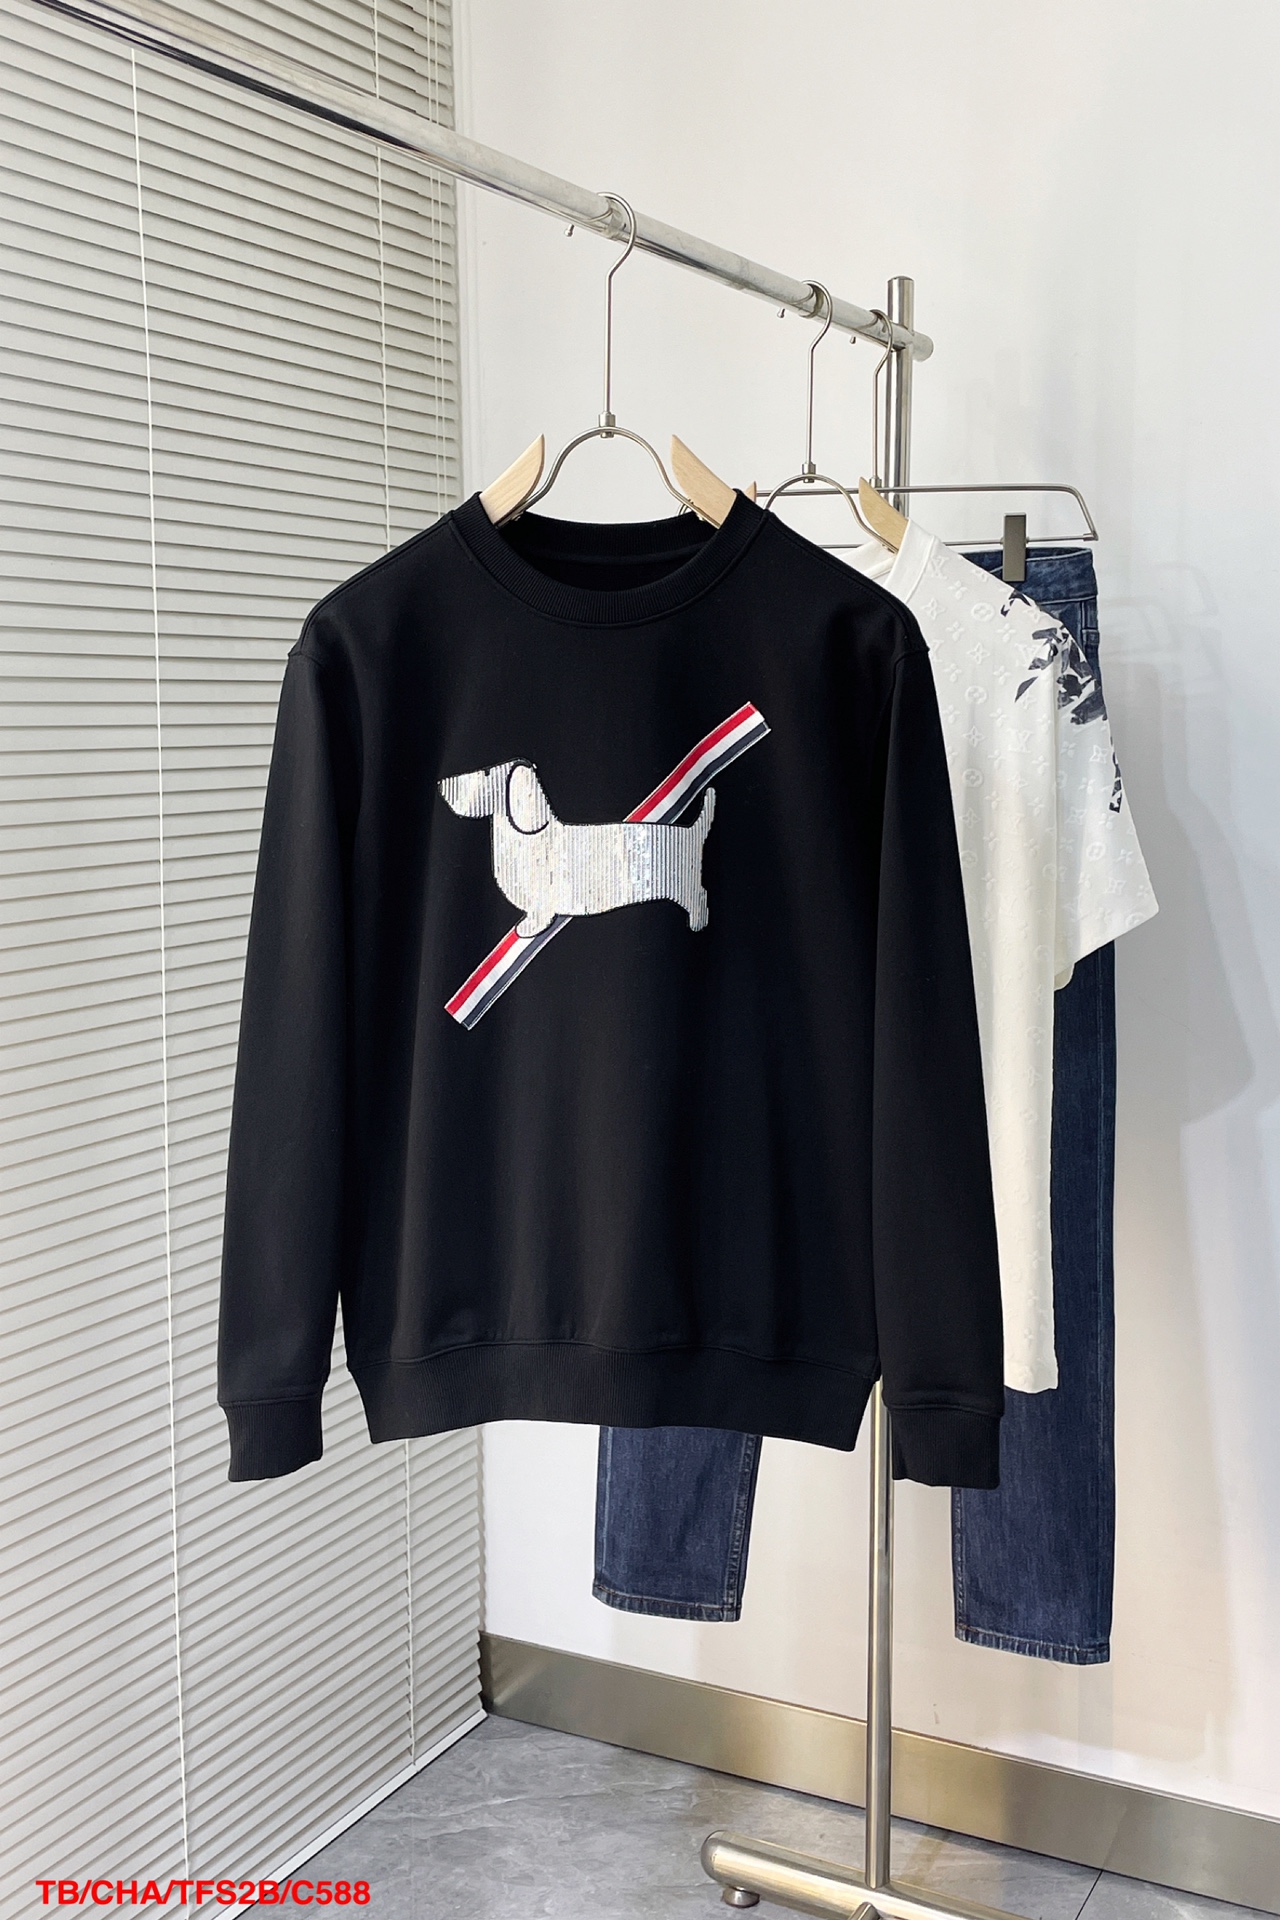 Thom Browne Clothing Sweatshirts Men Cotton Fall/Winter Collection Fashion Long Sleeve